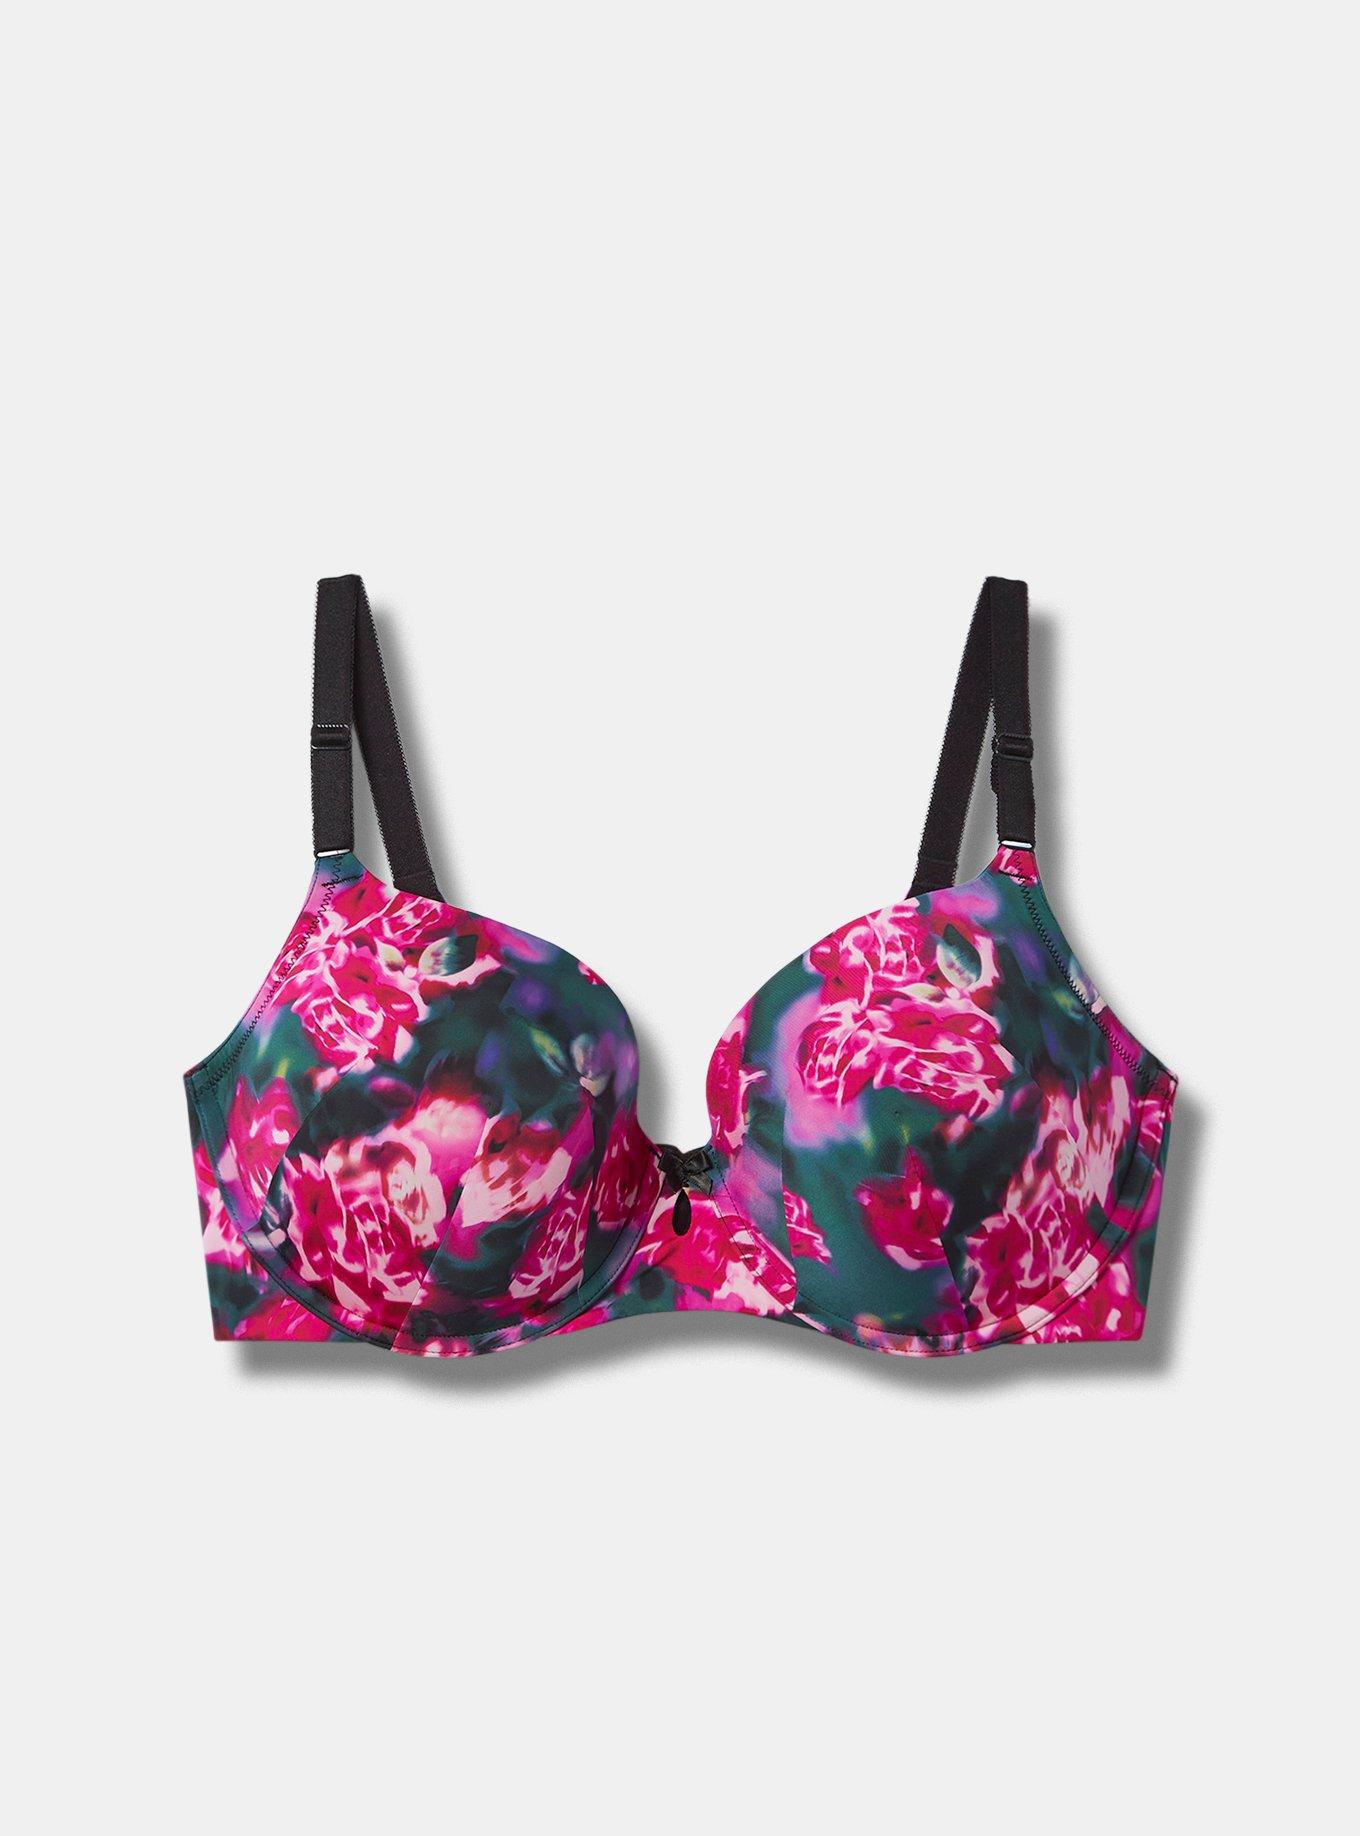 Find more Brand New 46h Bra for sale at up to 90% off